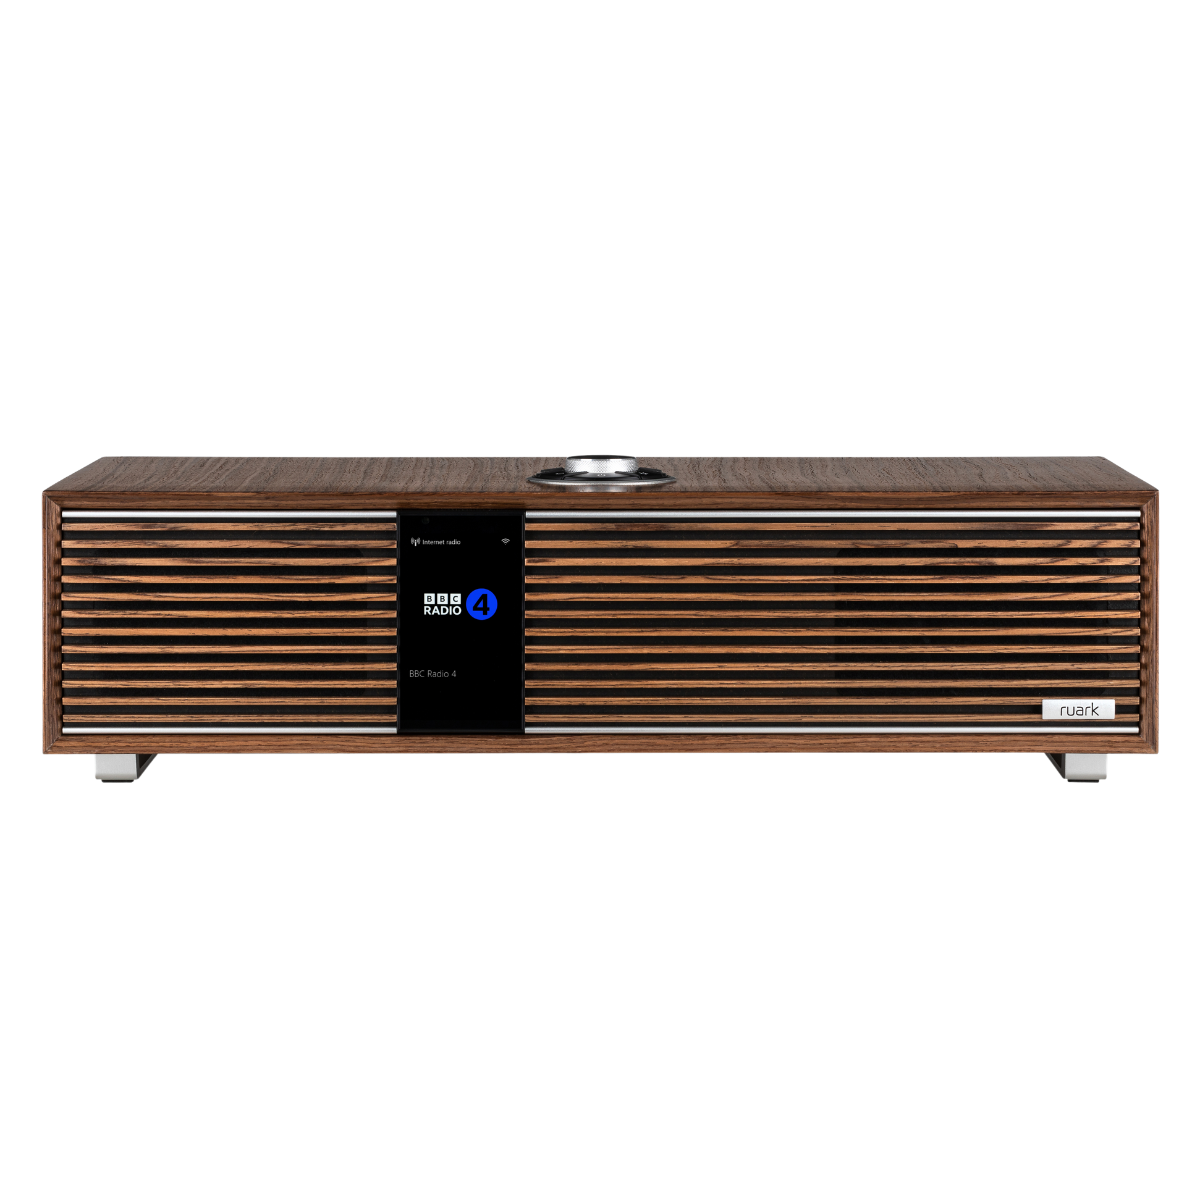 Ruark Audio R410 Wireless Music System #colour_Fused Walnut Veneer Cabinet and Grille